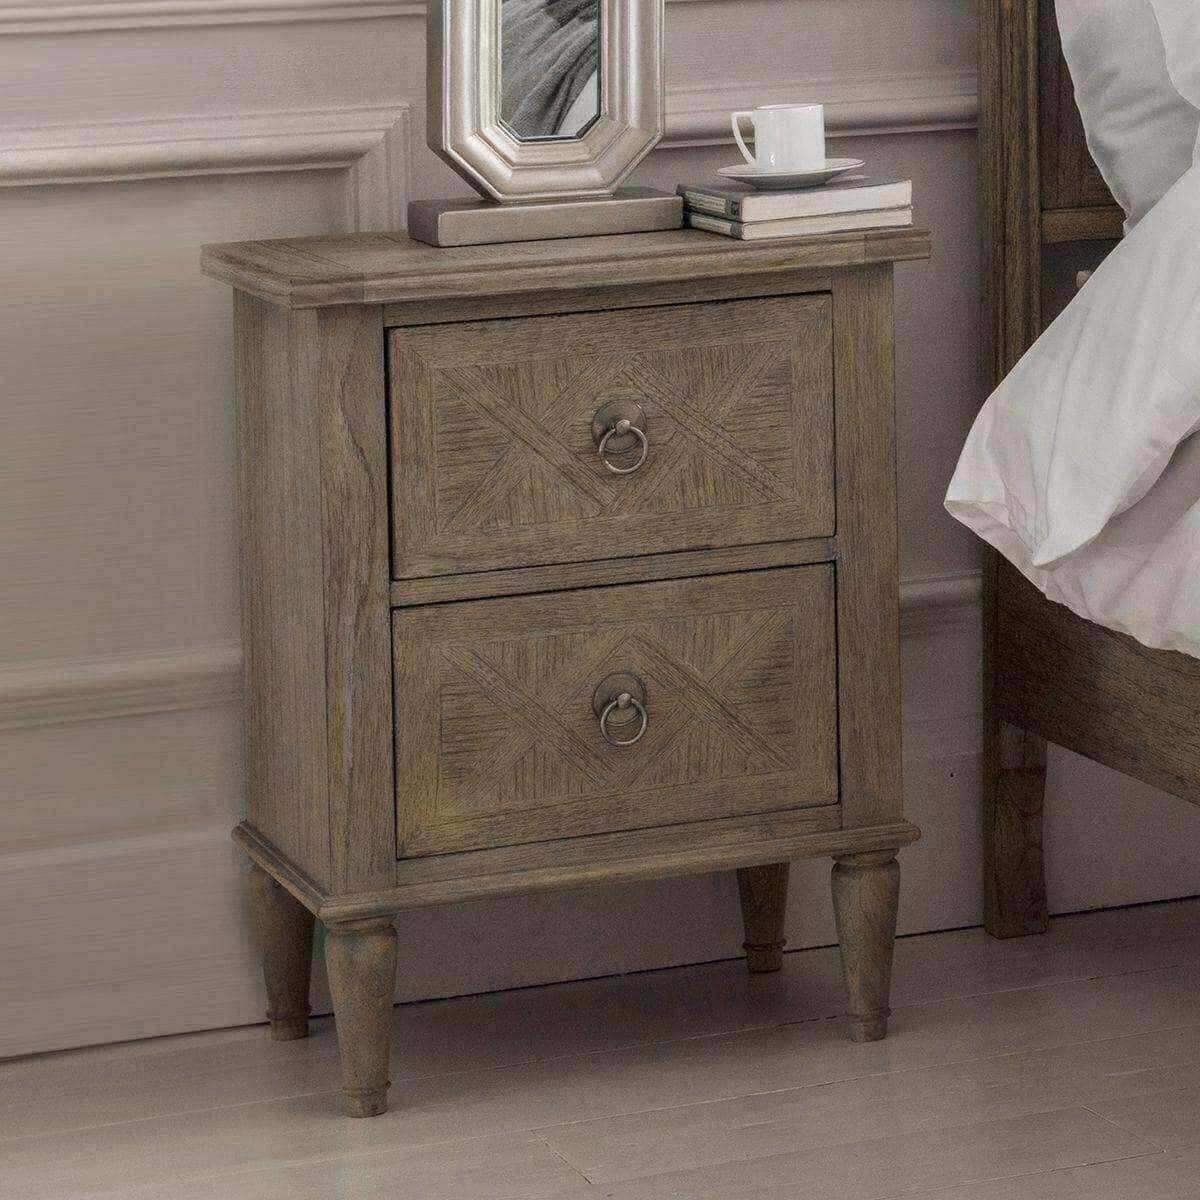 Wooden Parquet Styled Bedside Table - The Farthing